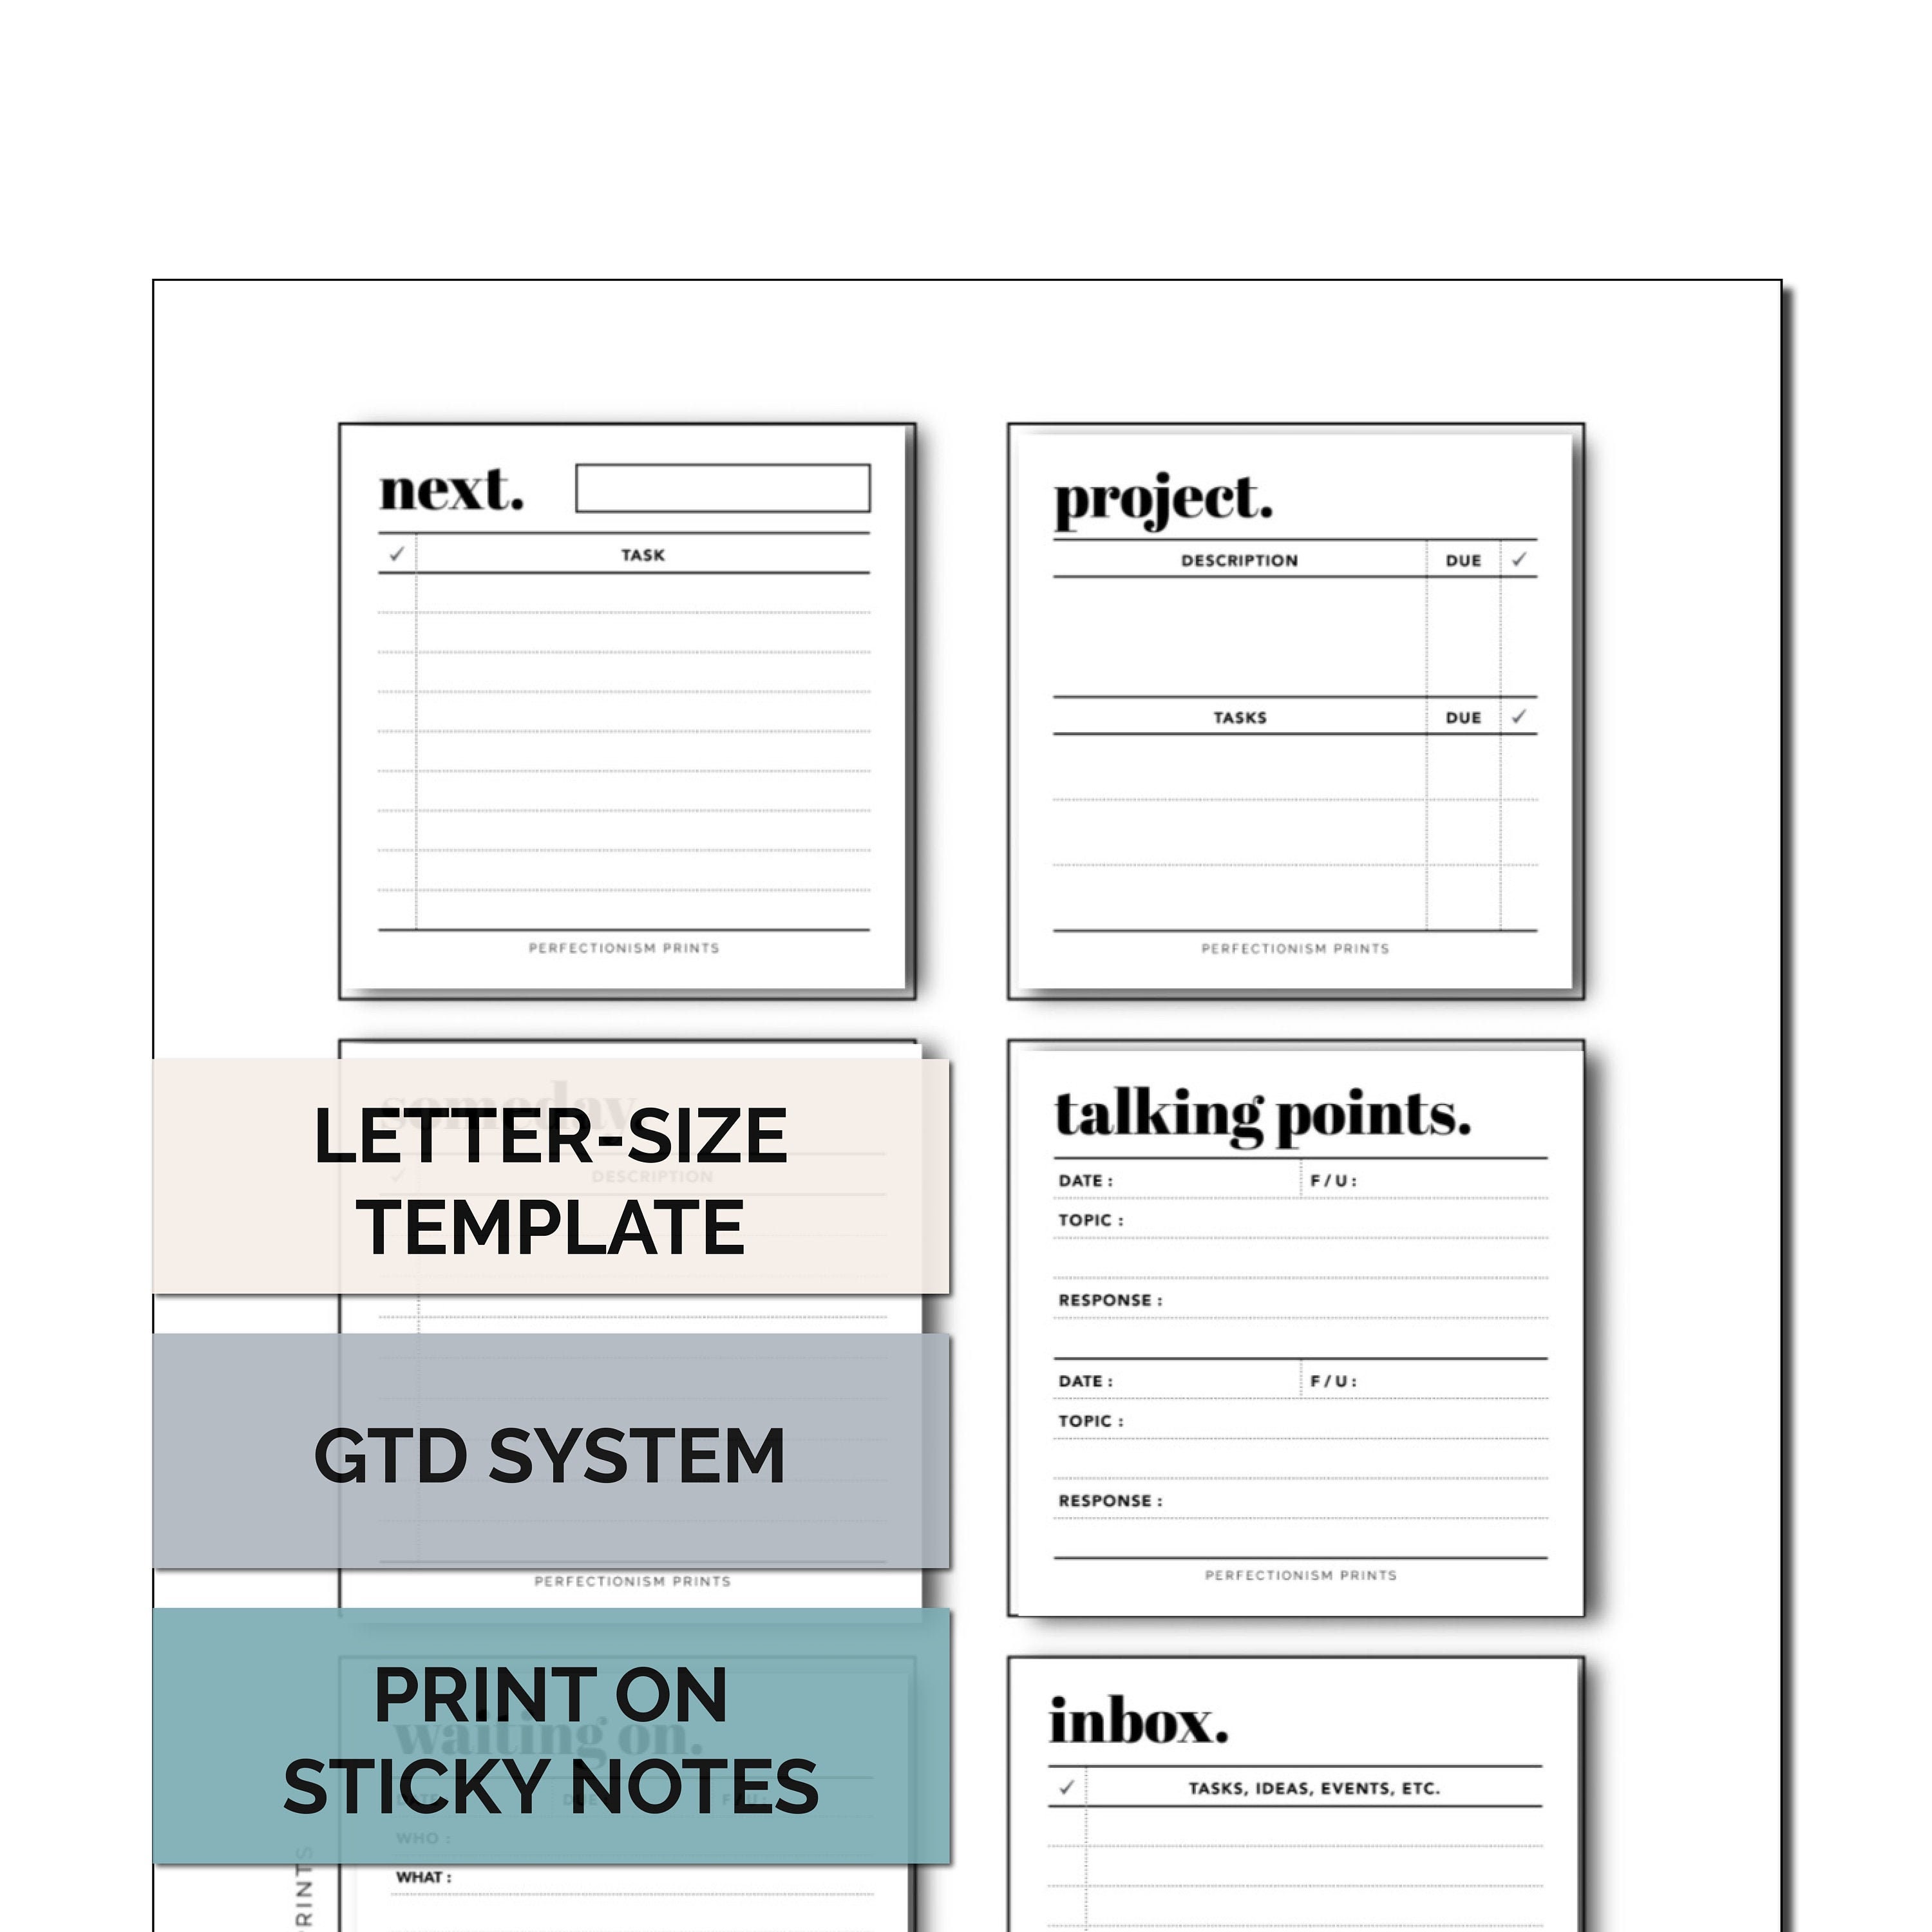 GTD Sticky Notes & LETTER Template Etsy